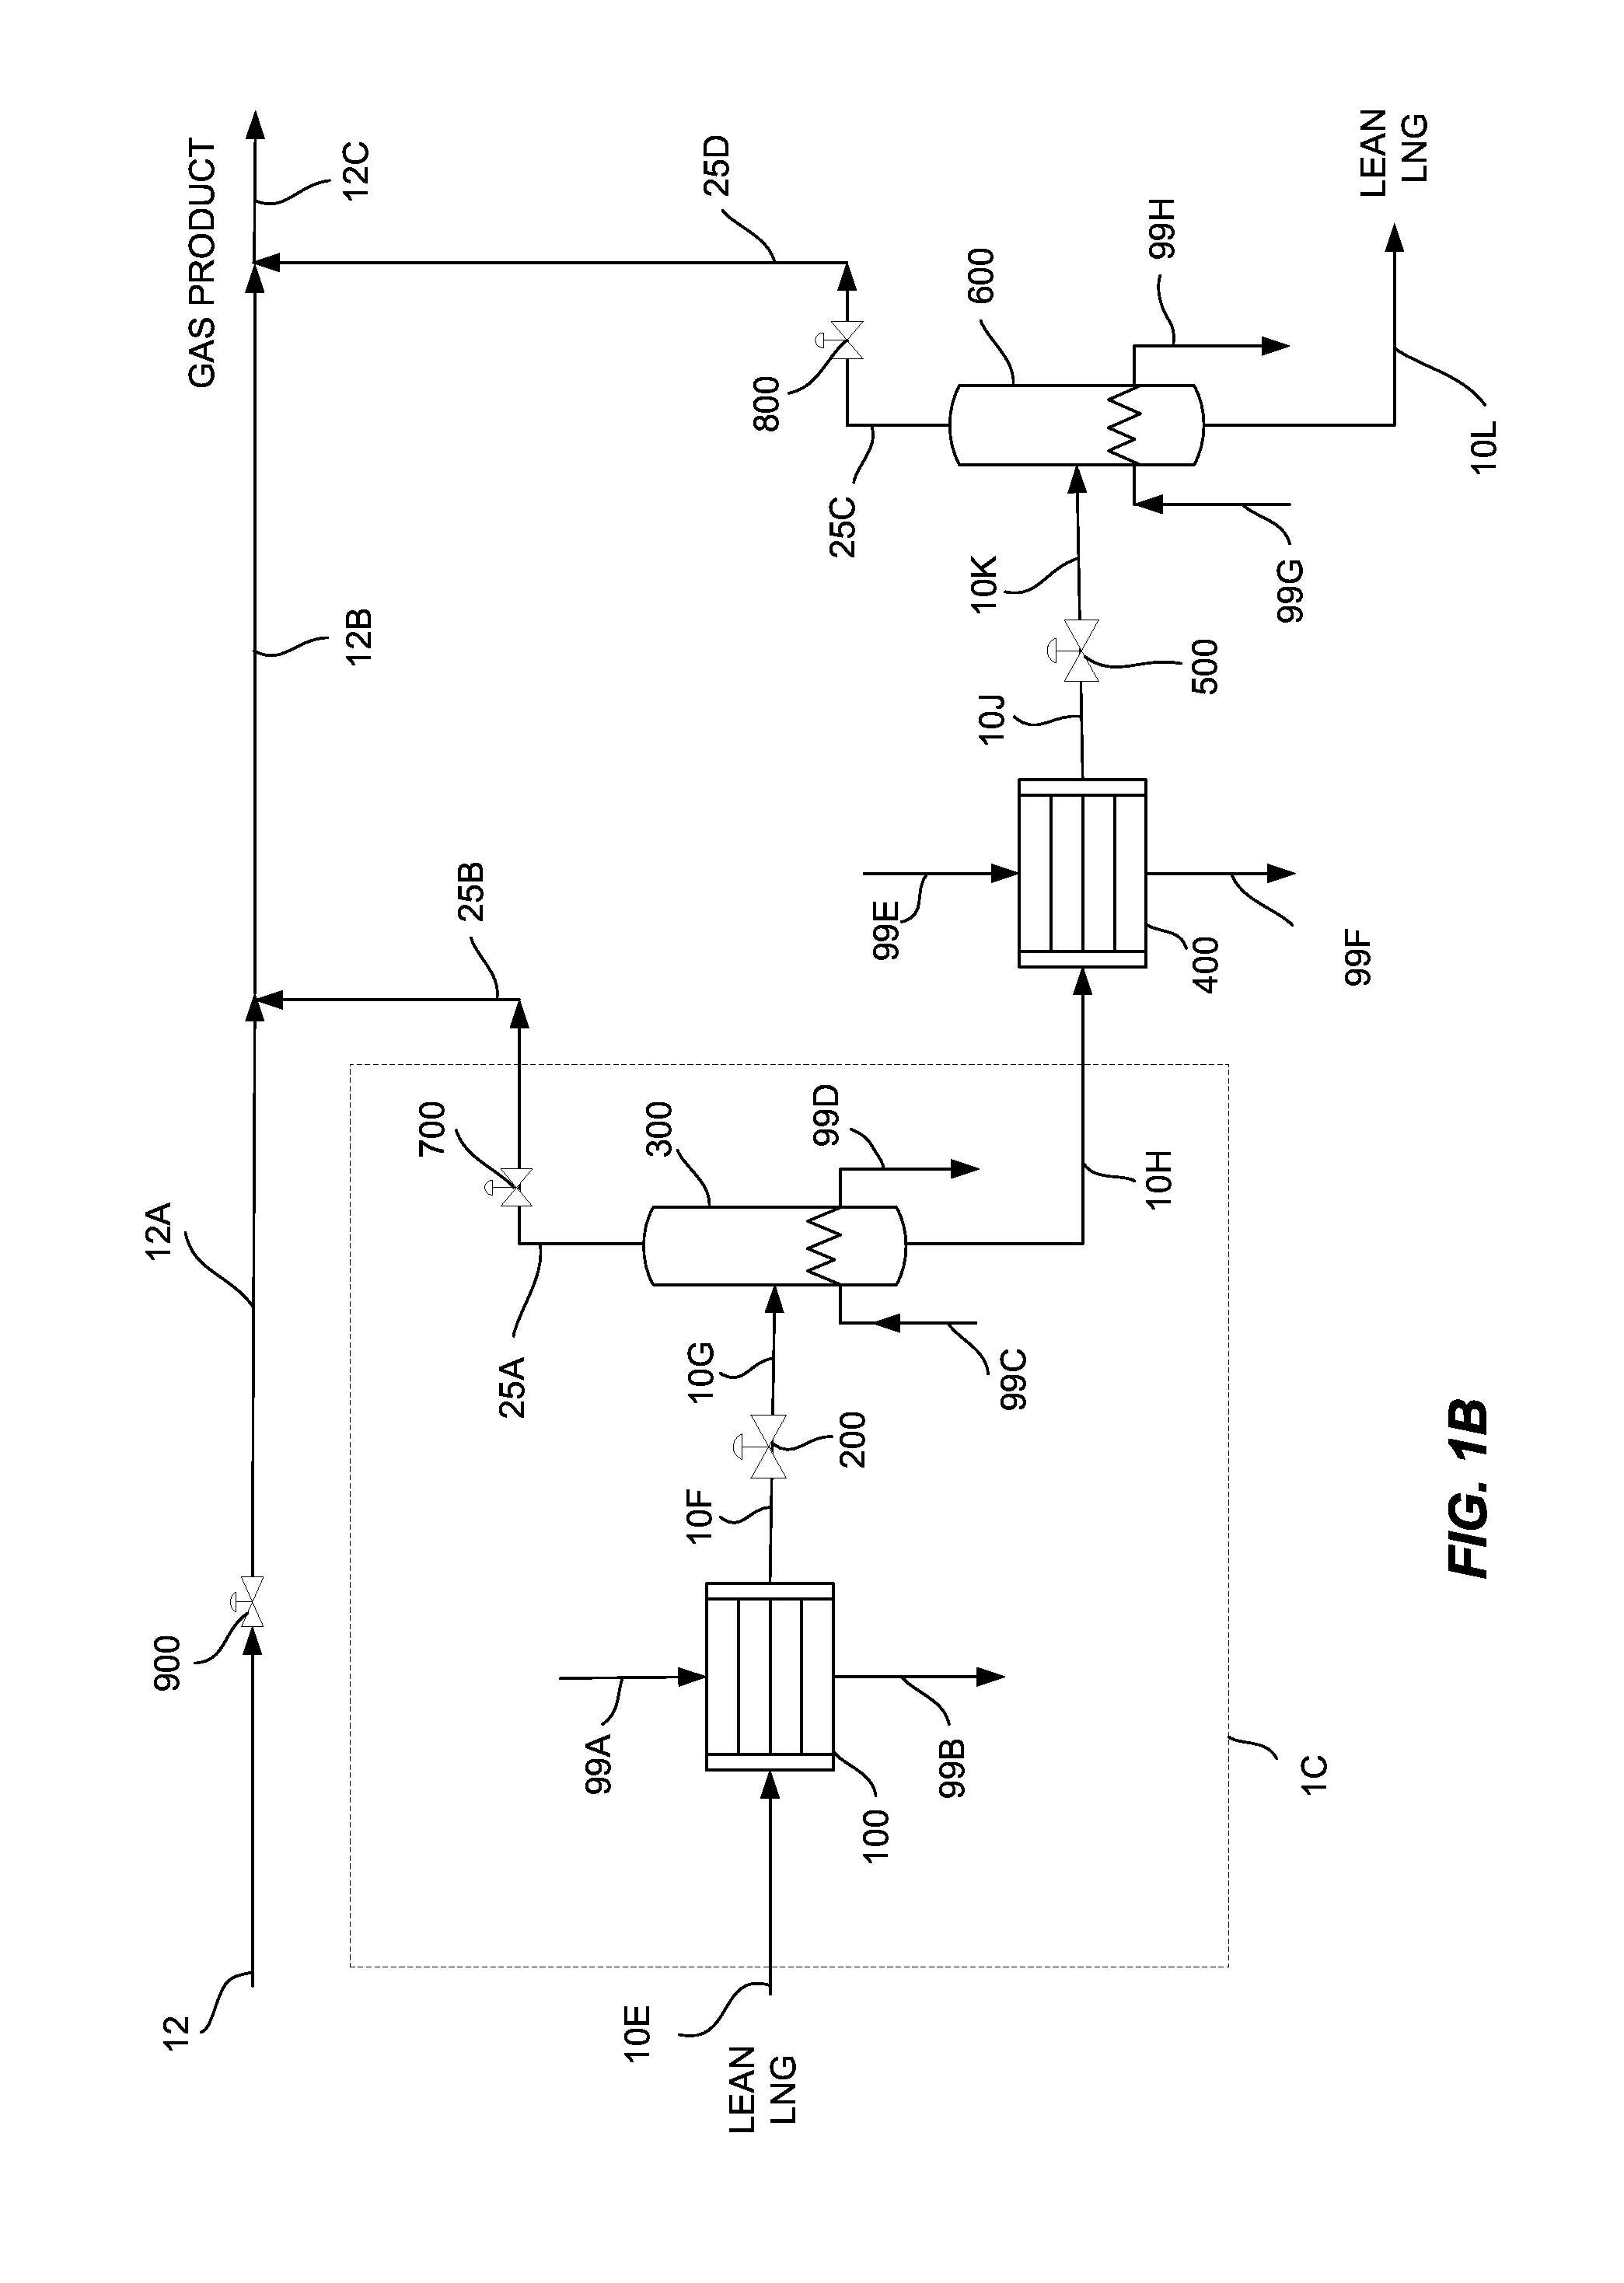 Process for separating and recovering ethane and heavier hydrocarbons from LNG